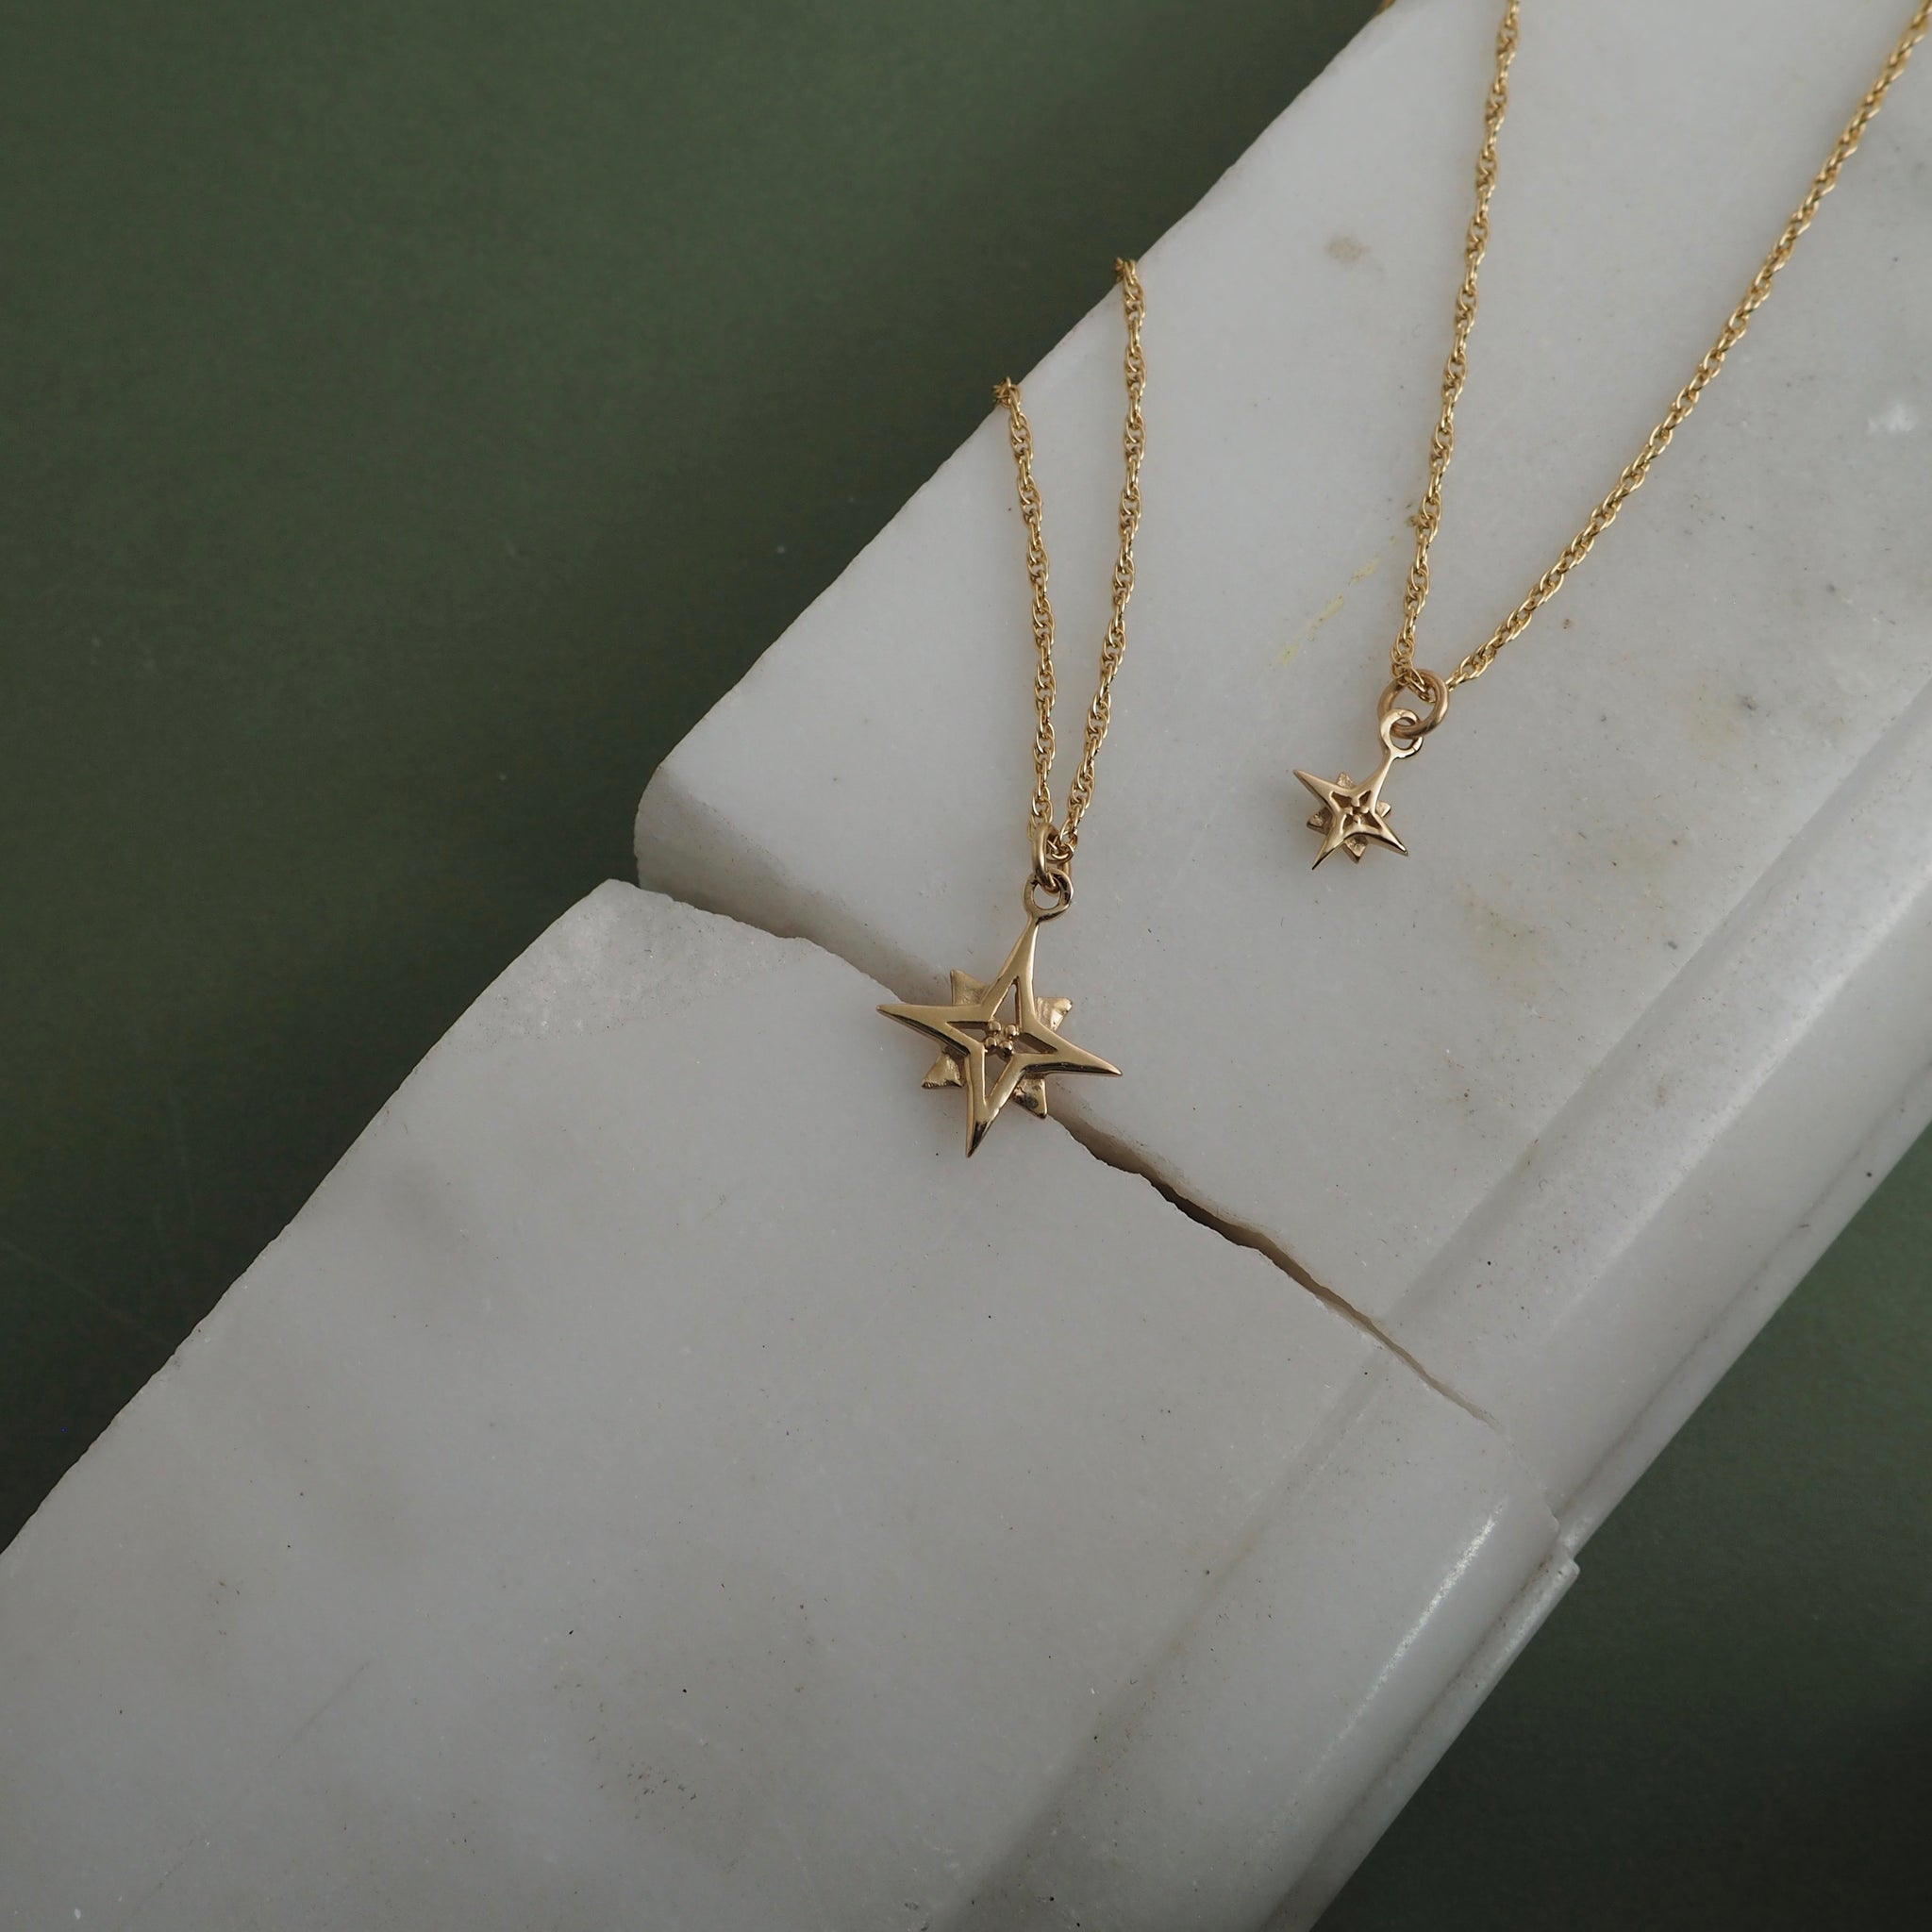 9ct Gold Compass Star Necklace by Yasmin Everley